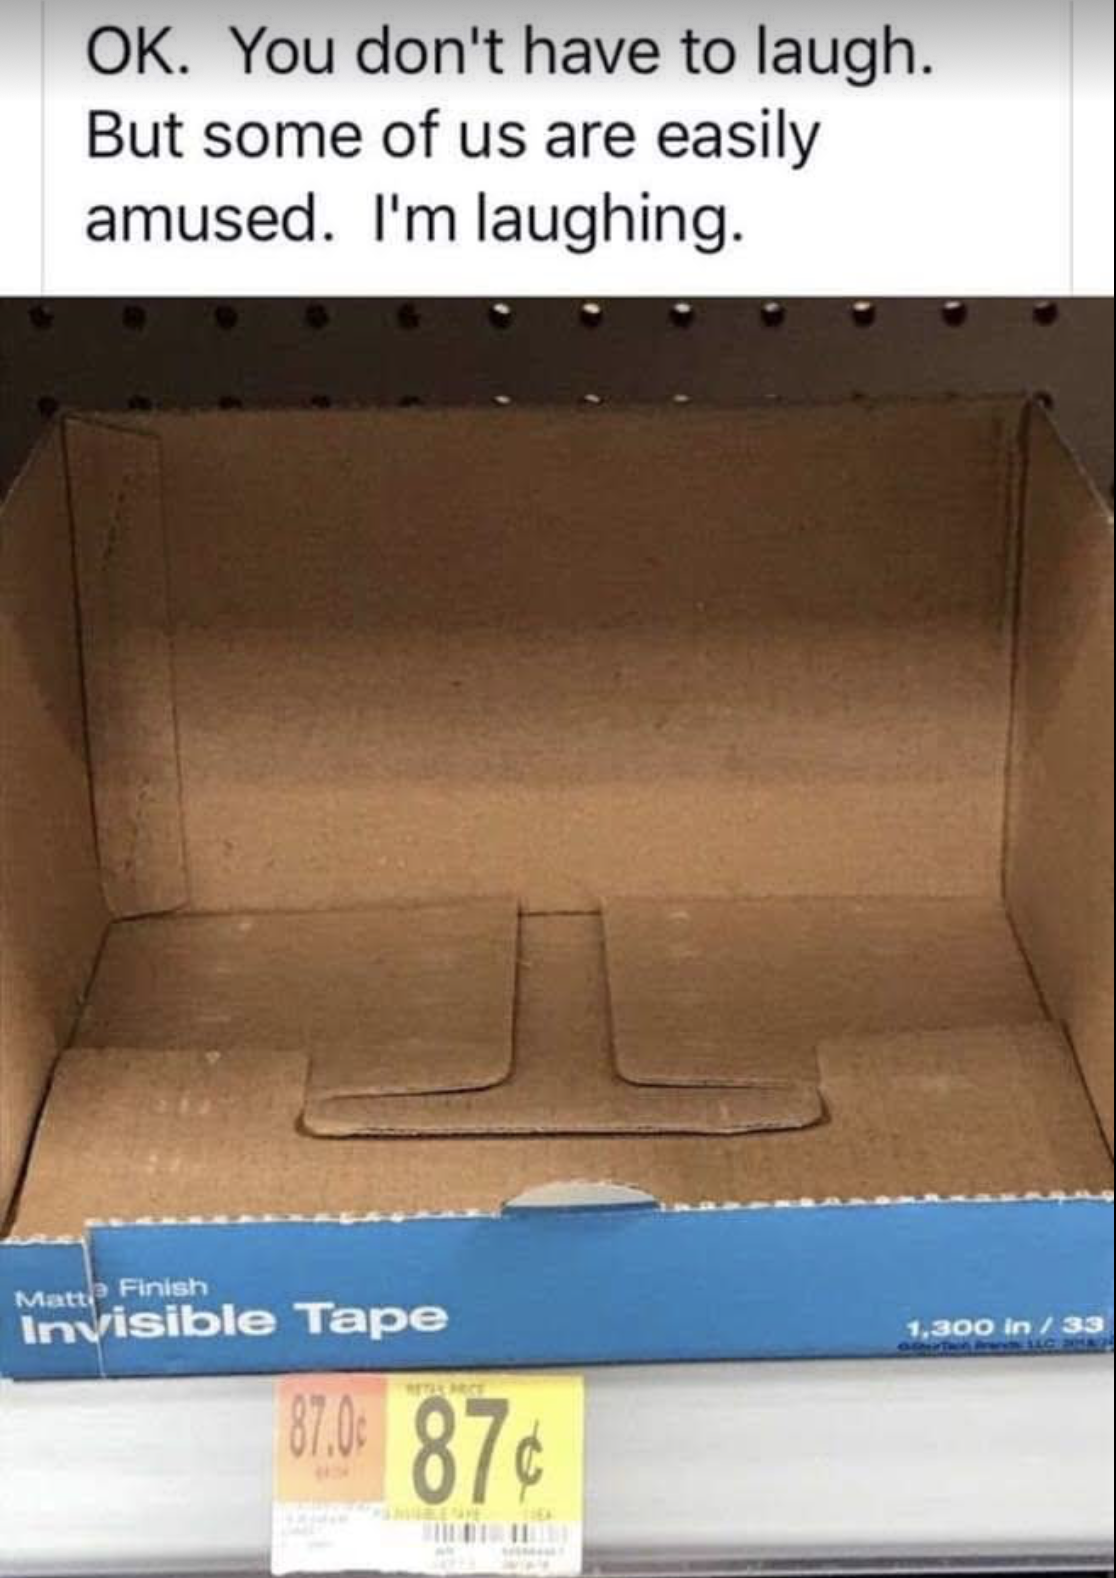 invisible tape meme - Ok. You don't have to laugh. But some of us are easily amused. I'm laughing. invisible Tape 1.2 na 17.0 87